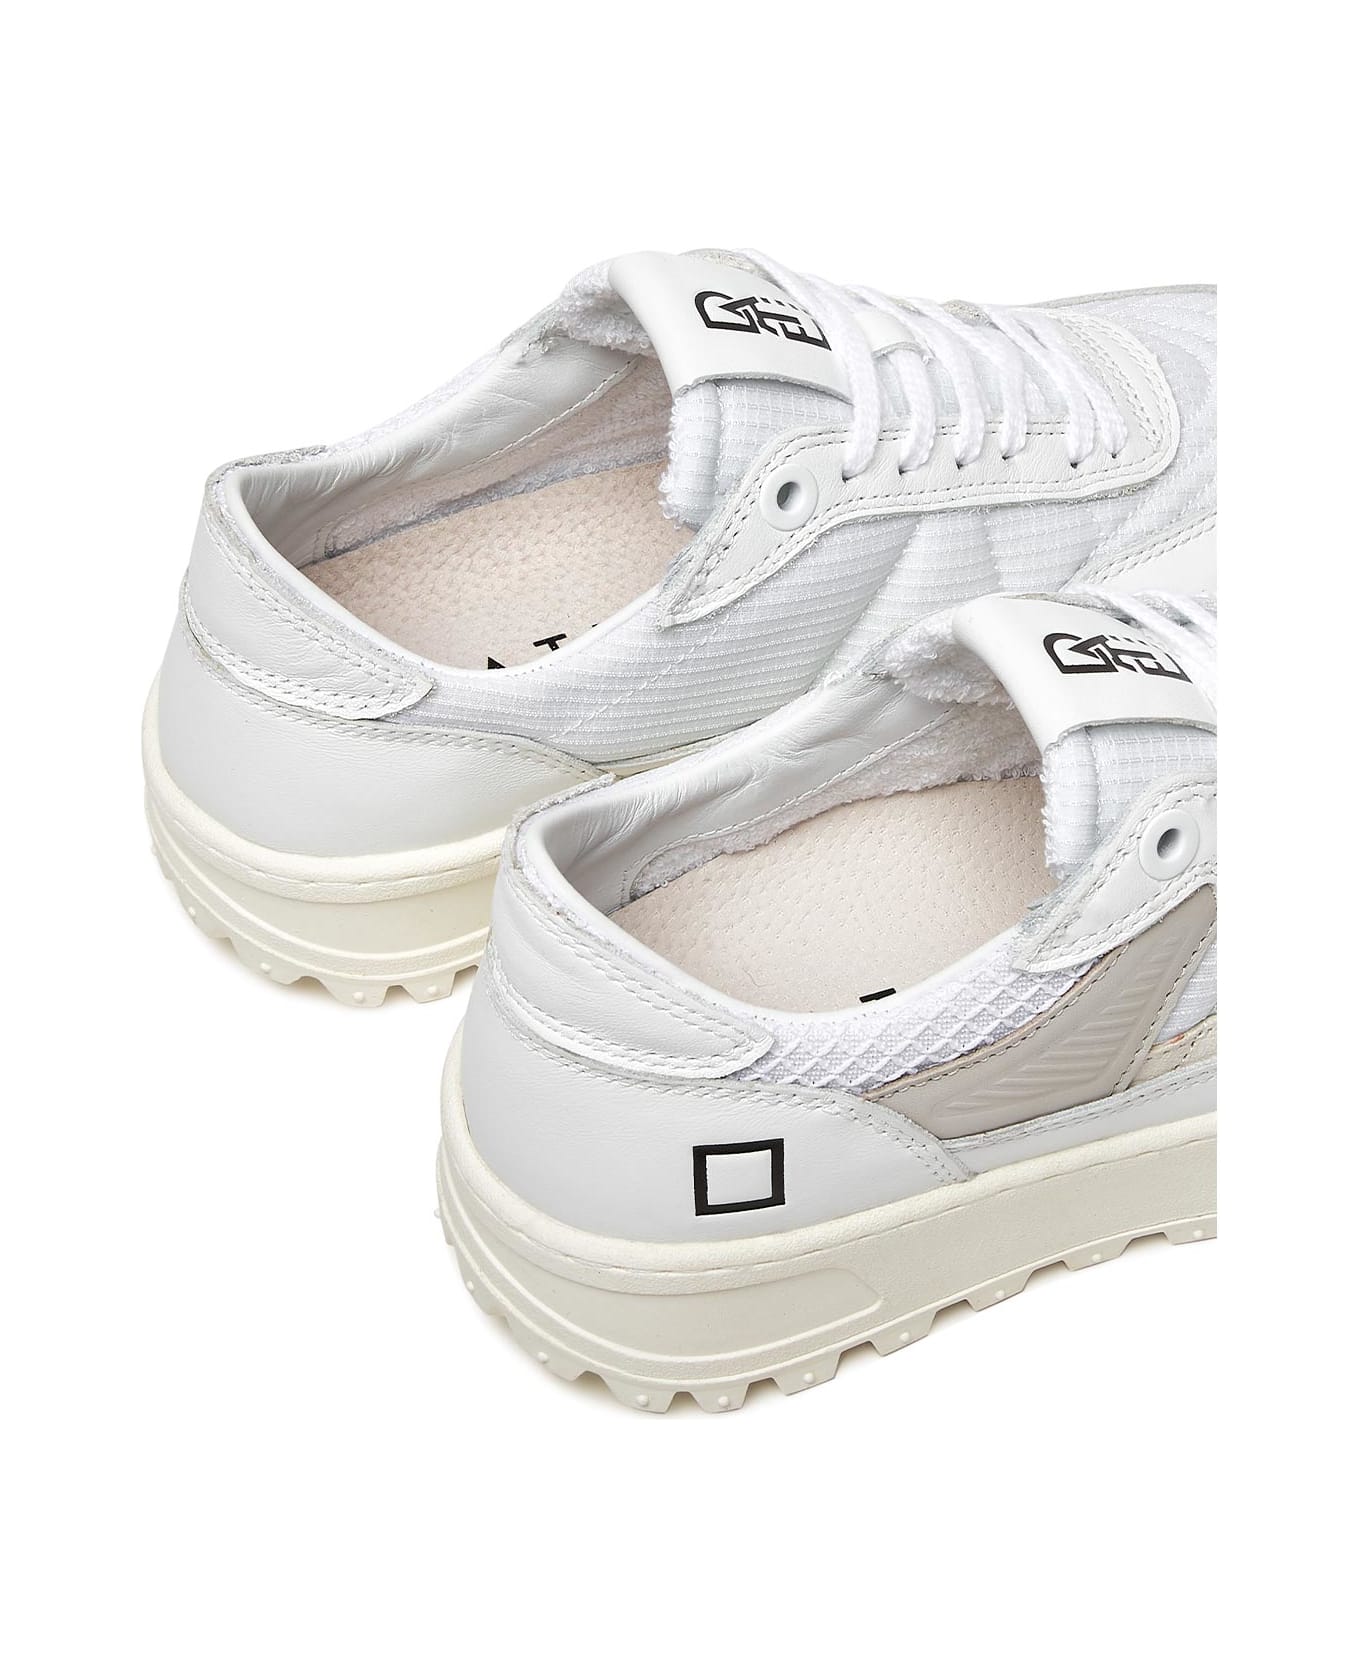 D.A.T.E. White Kdue Sneaker In Leather - WHITE スニーカー